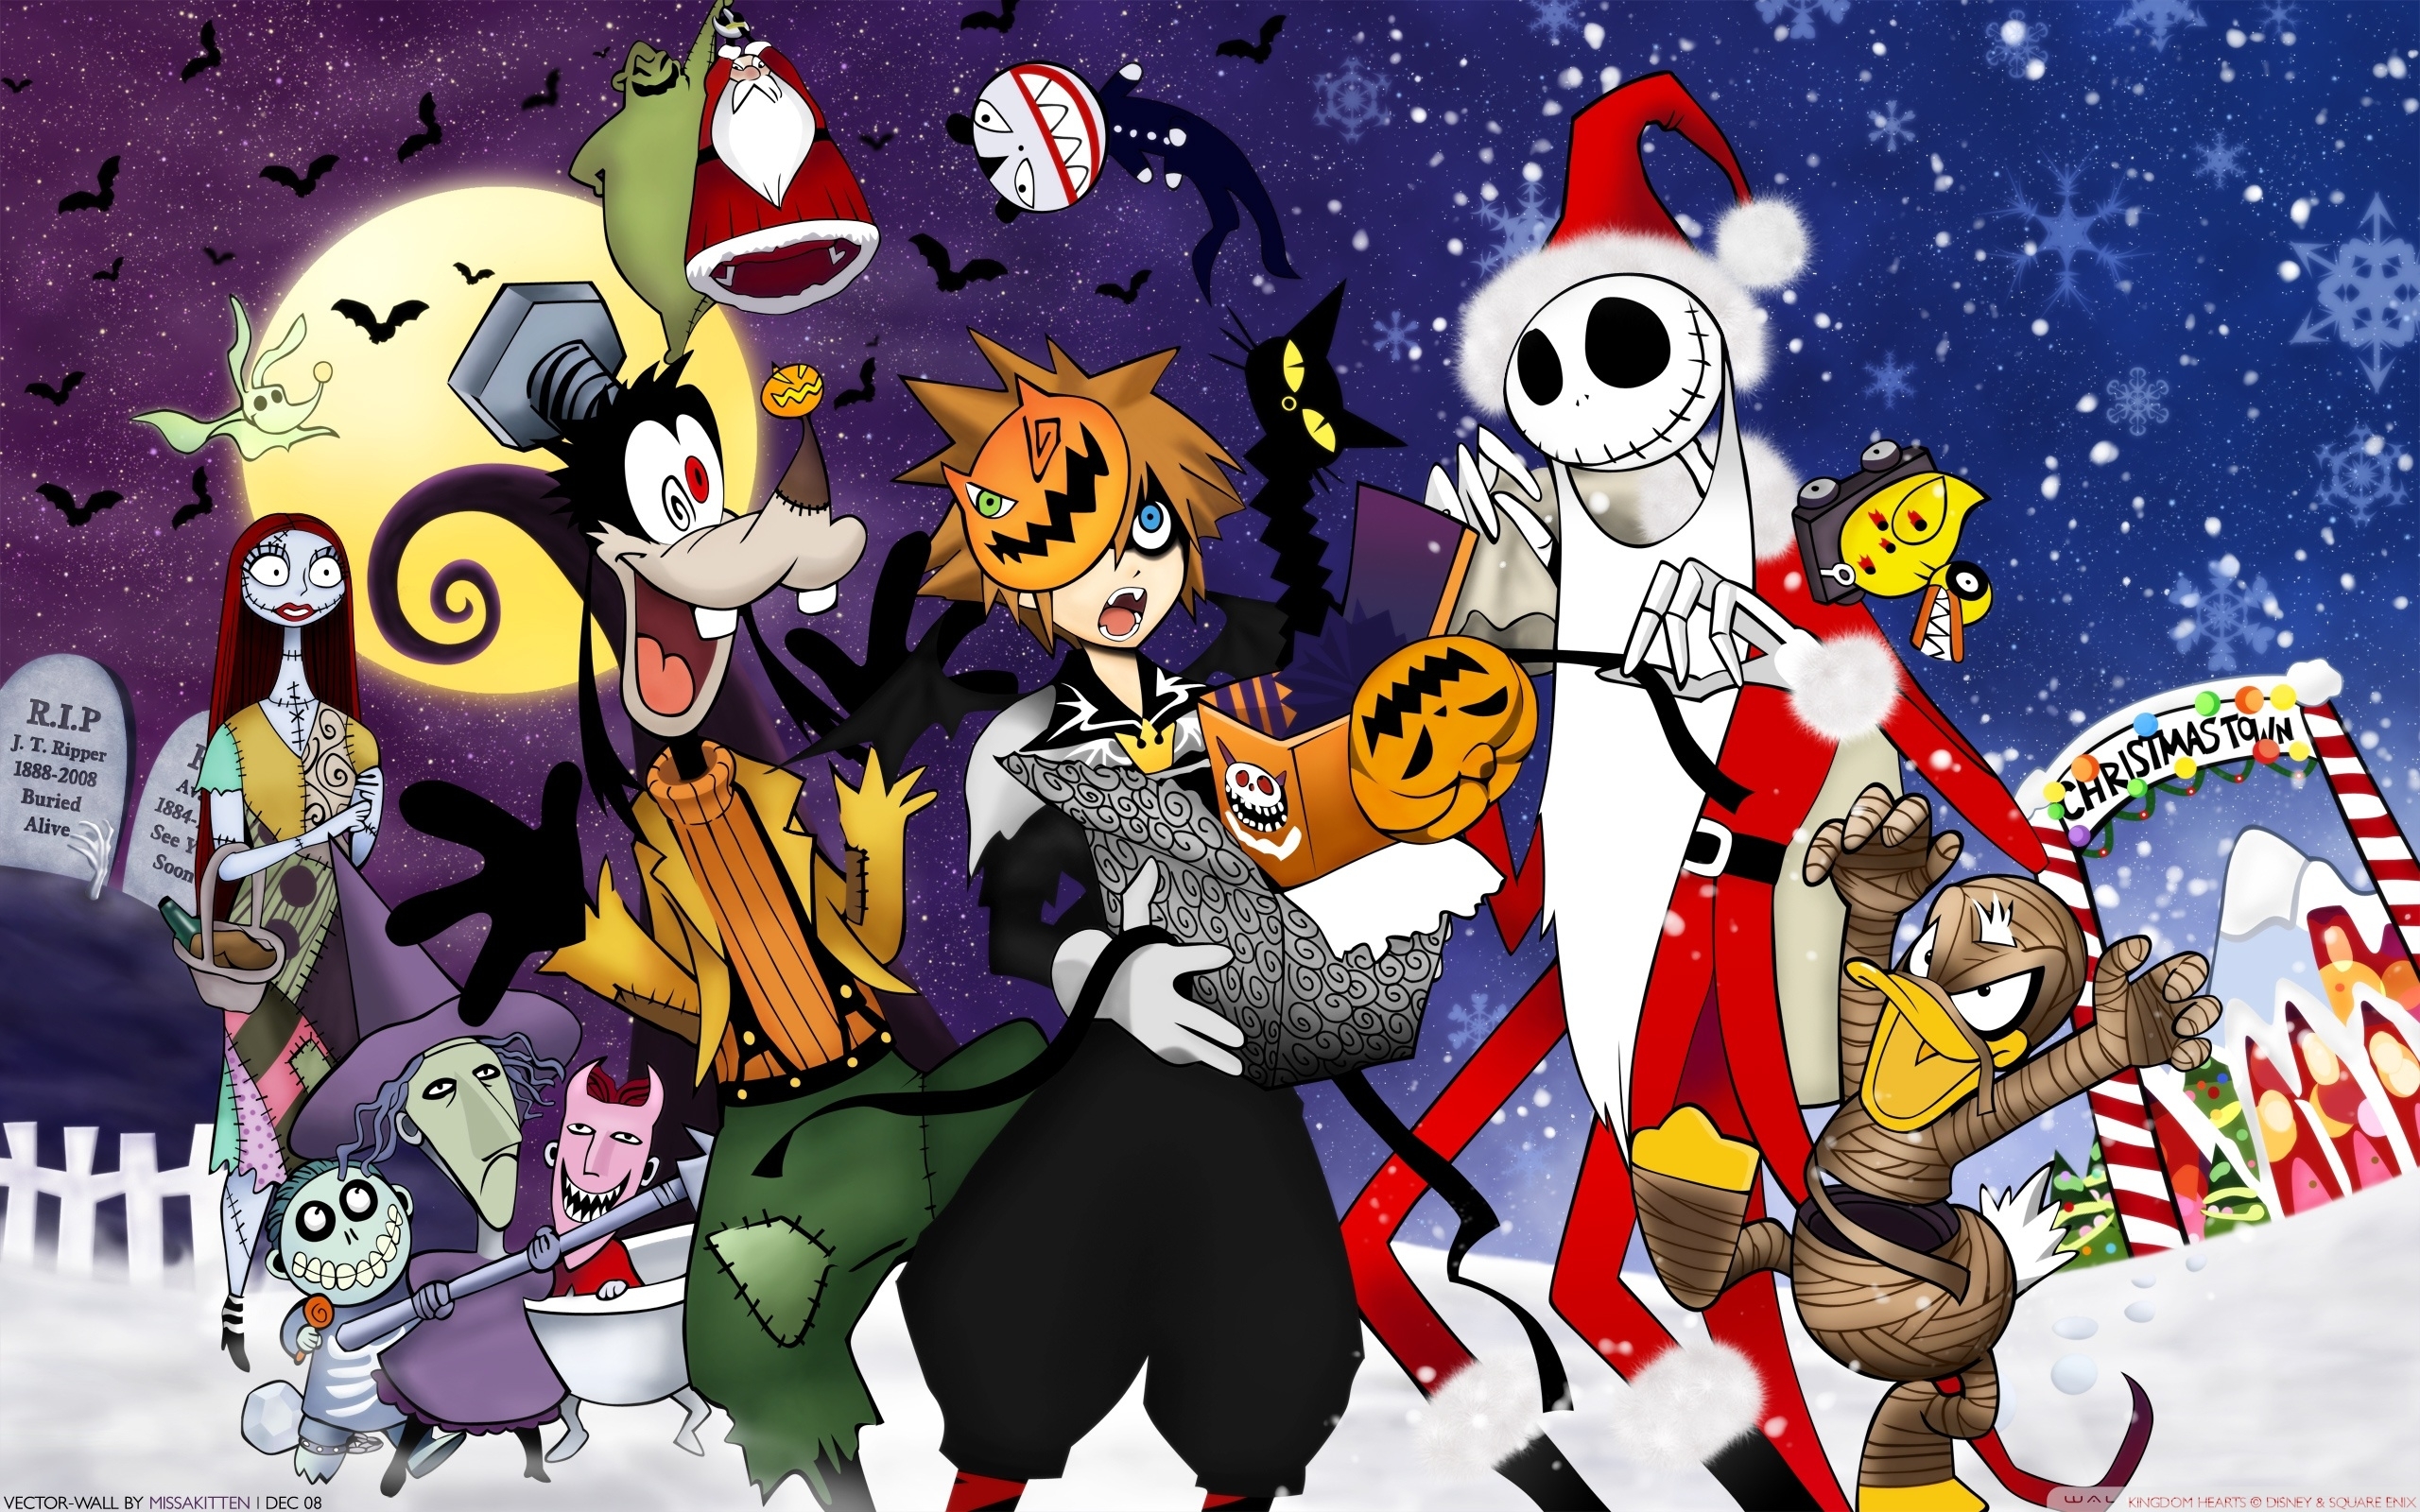 10 Top Kingdom Hearts Halloween Wallpaper FULL HD 1080p For PC Background